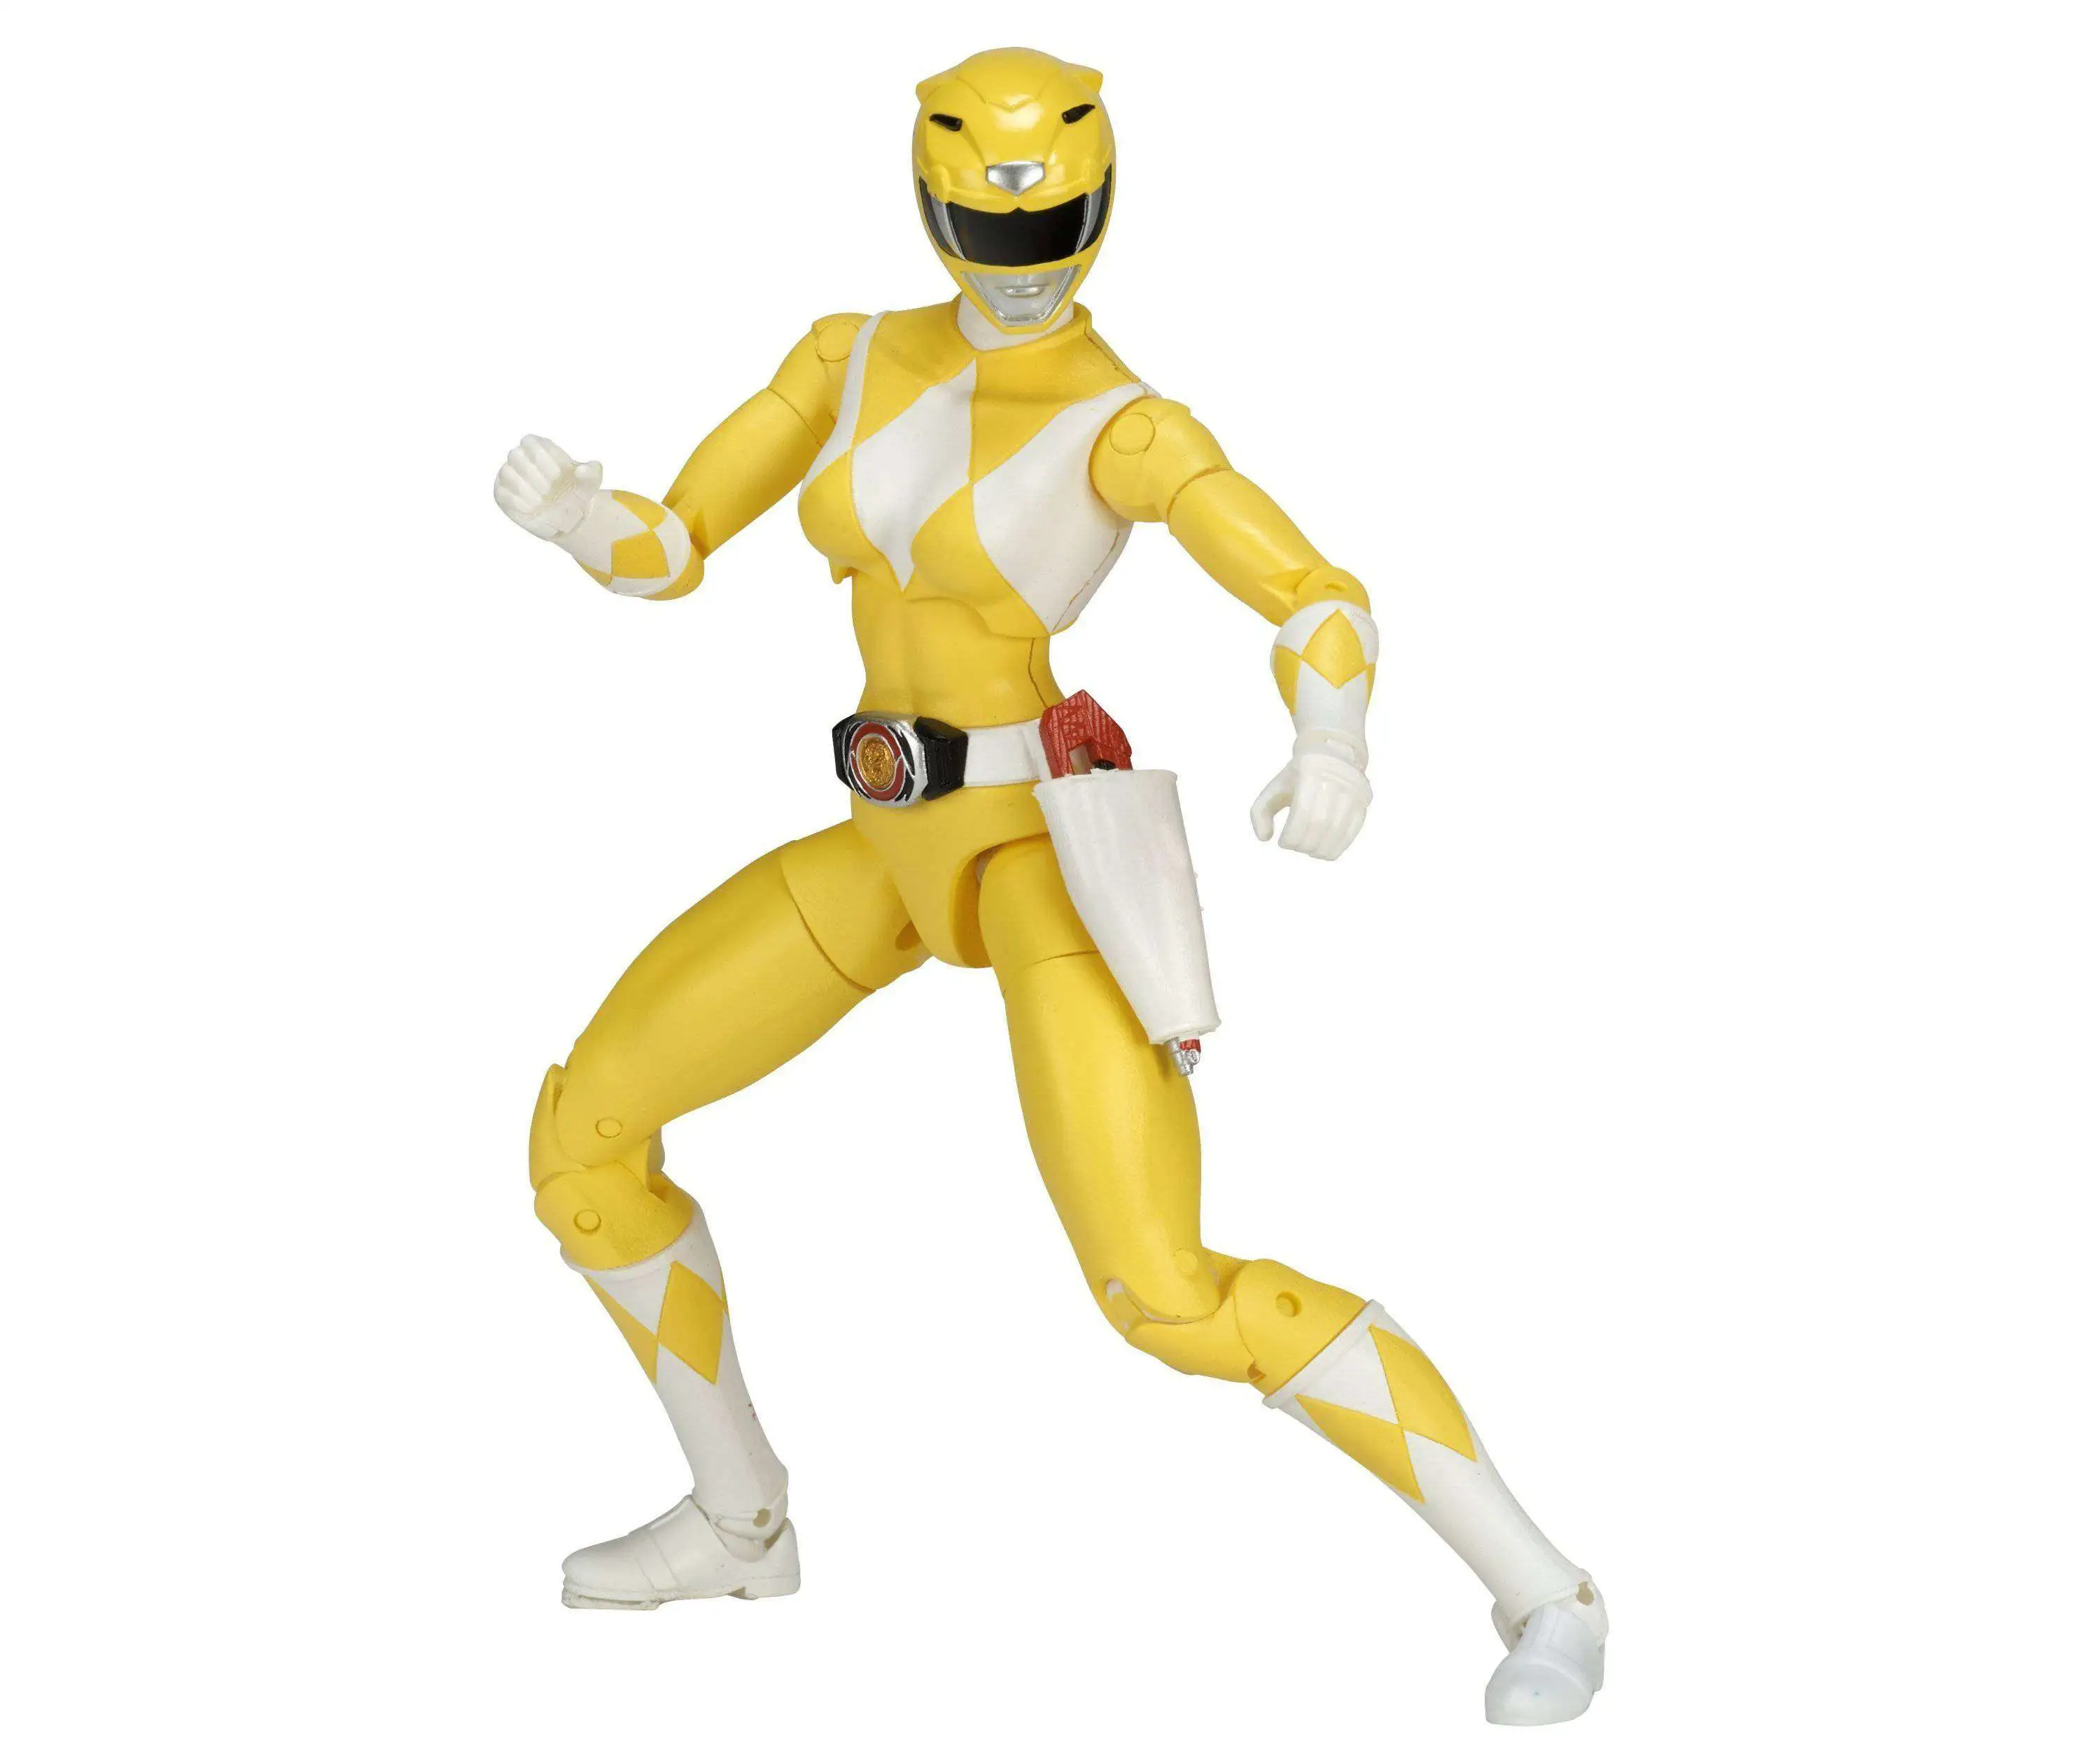 Yellow Ranger Mighty Morphin Power Rangers Action Figures Bandai 31305 for sale online 